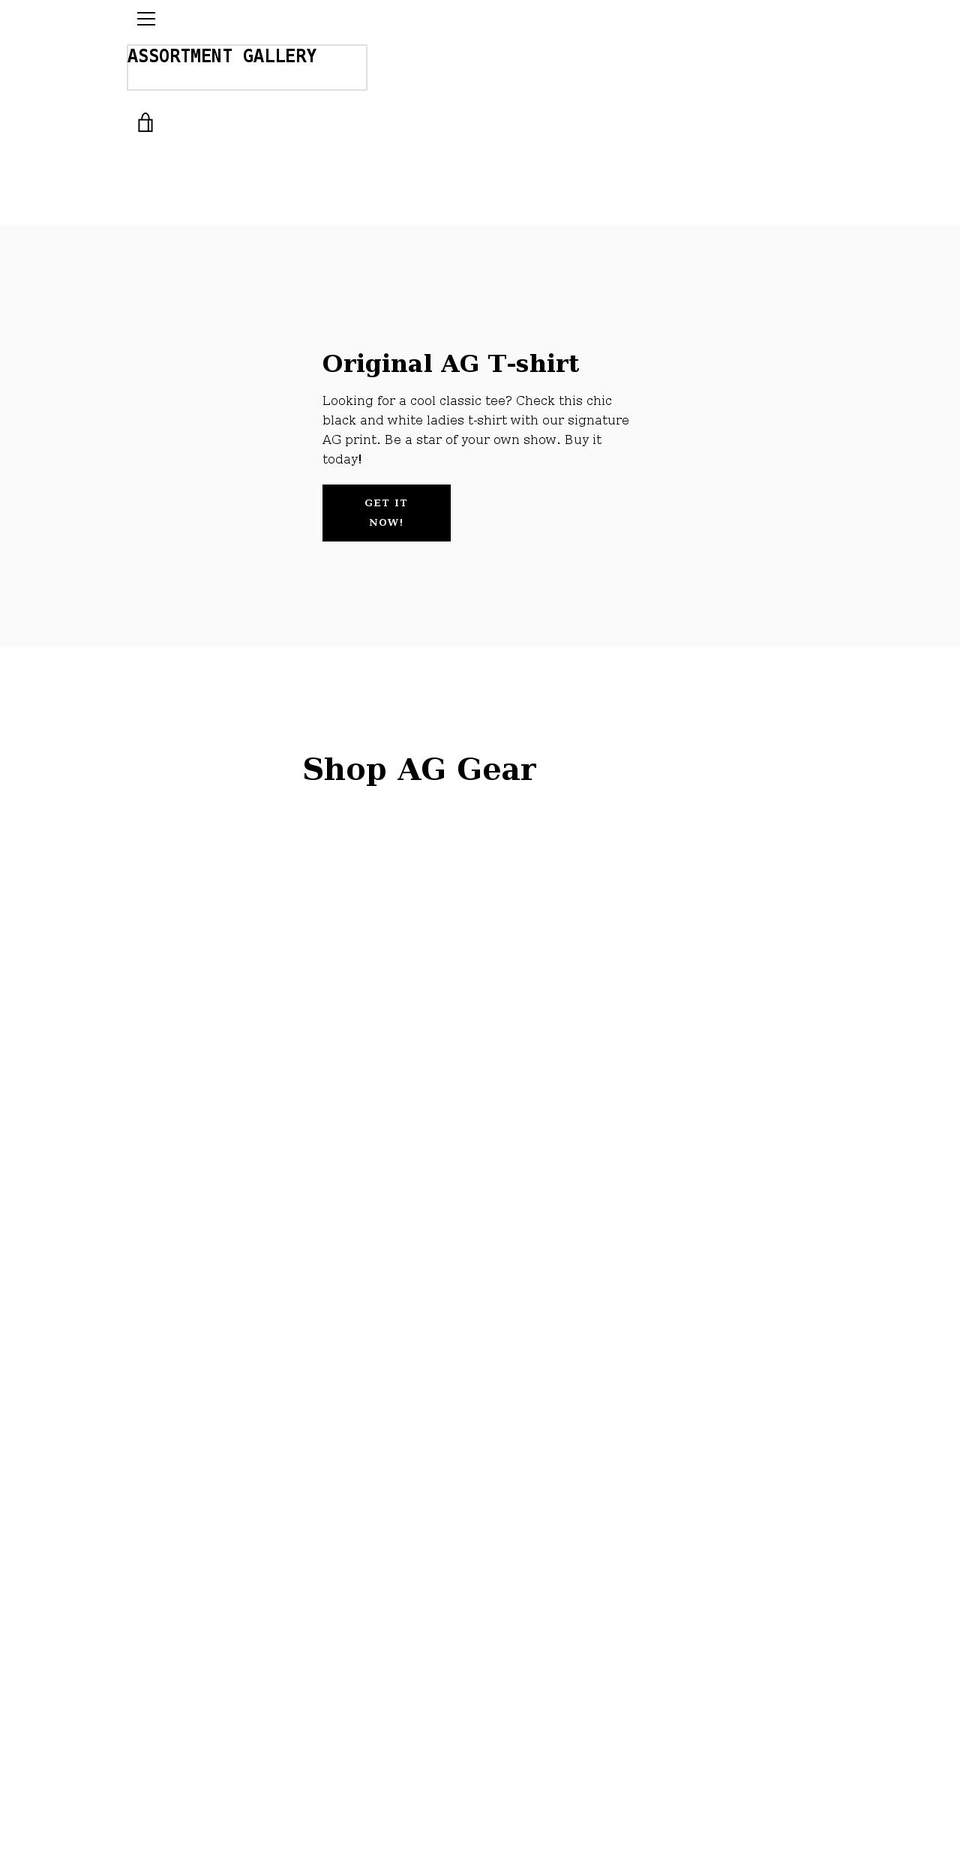 shopbooster173-29041720 Shopify theme site example assortment-gallery.com